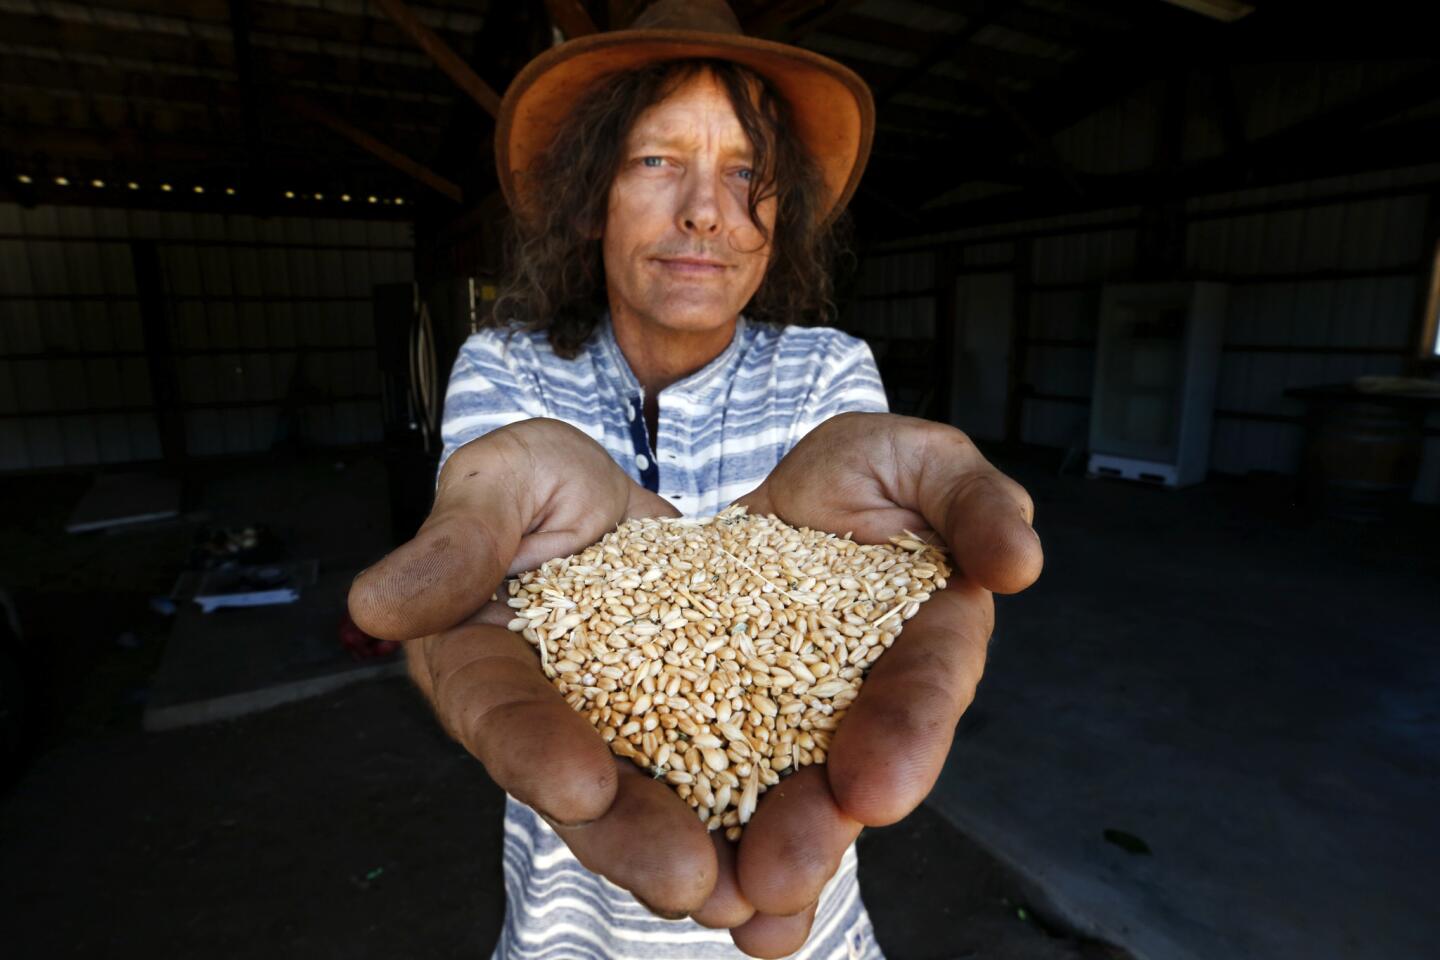 Jon Hammond shows Sonora wheat berries grown in Tehachapi that are part of the Tehachapi Heritage Grain Project.